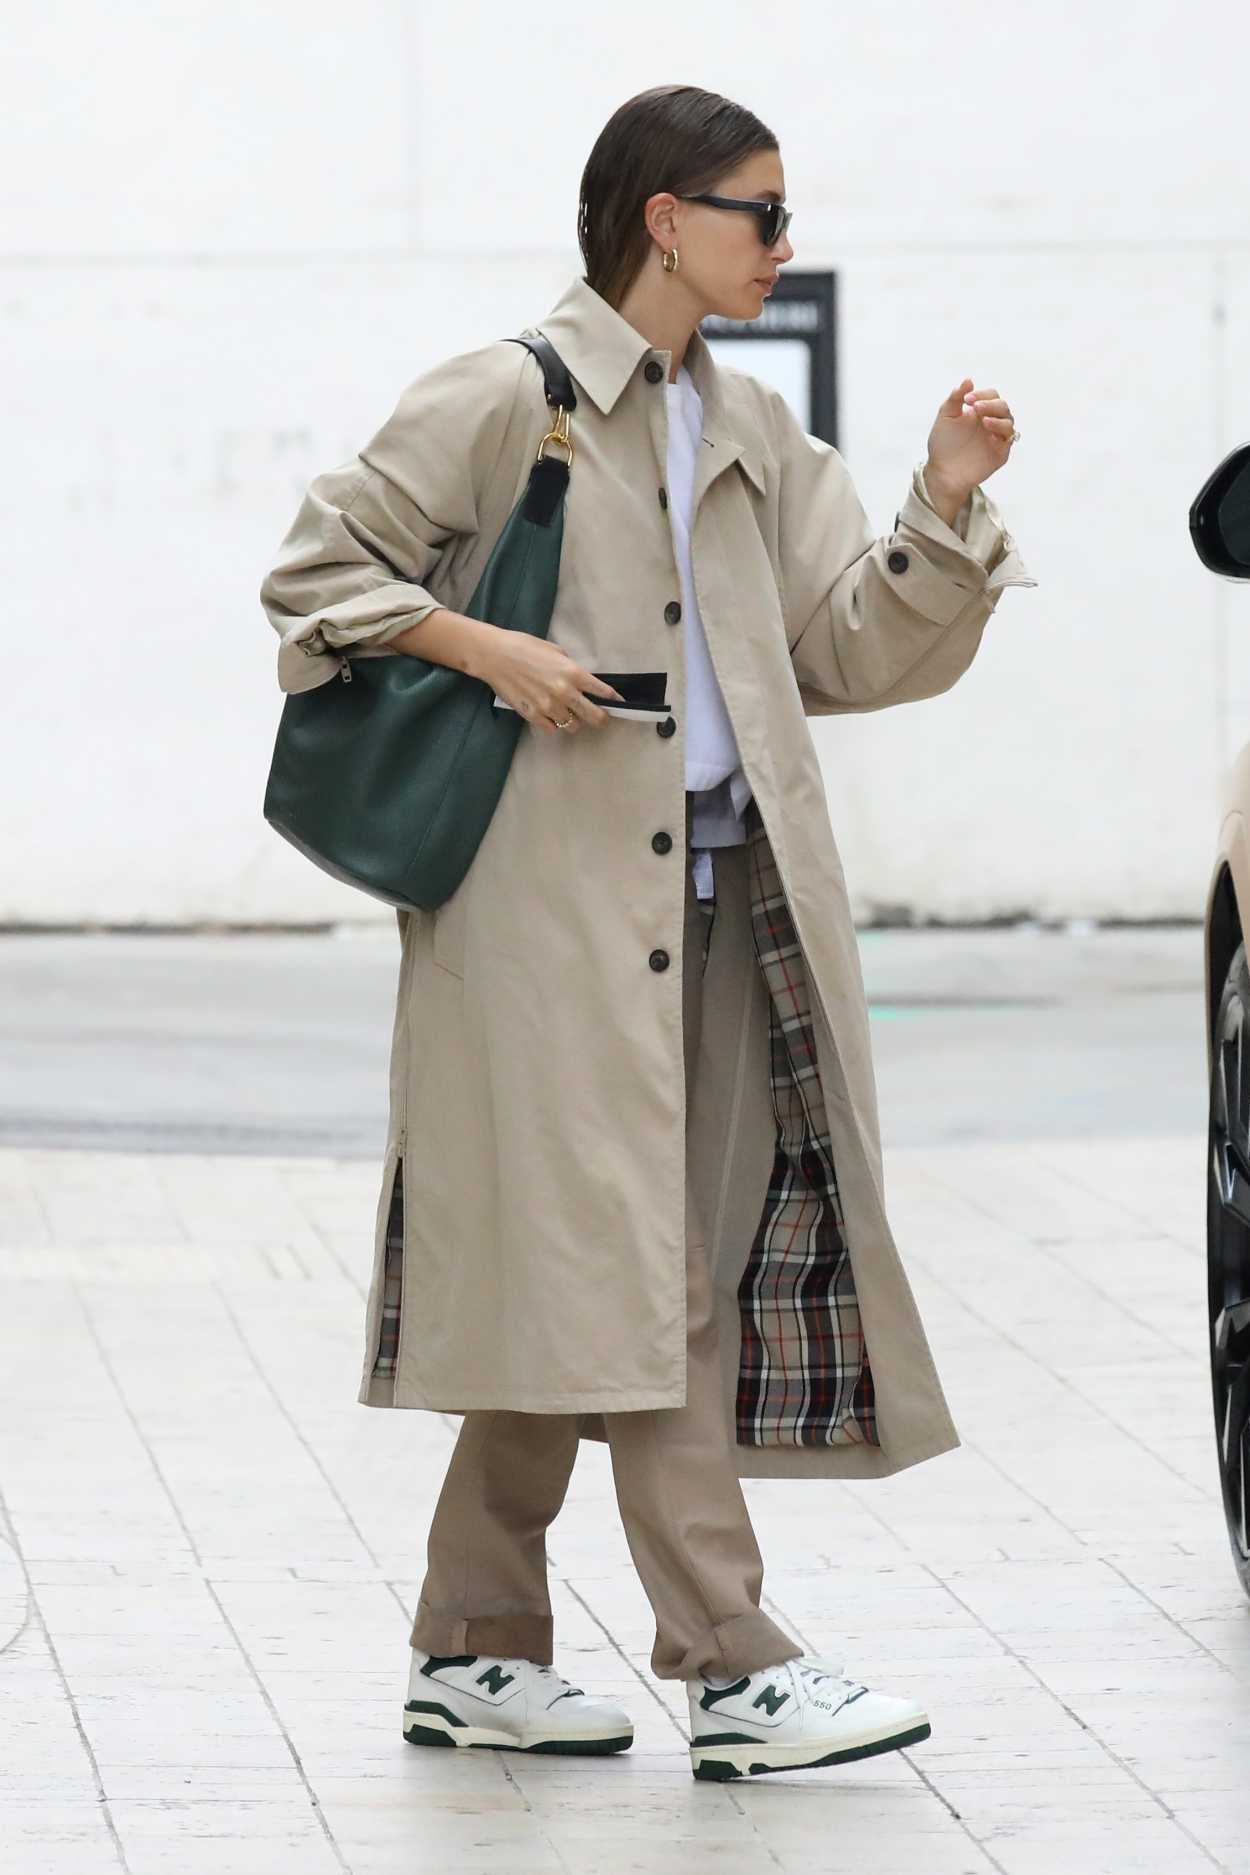 Hailey Bieber in a Beige Trench Coat Heads to a Meeting in Los Angeles ...